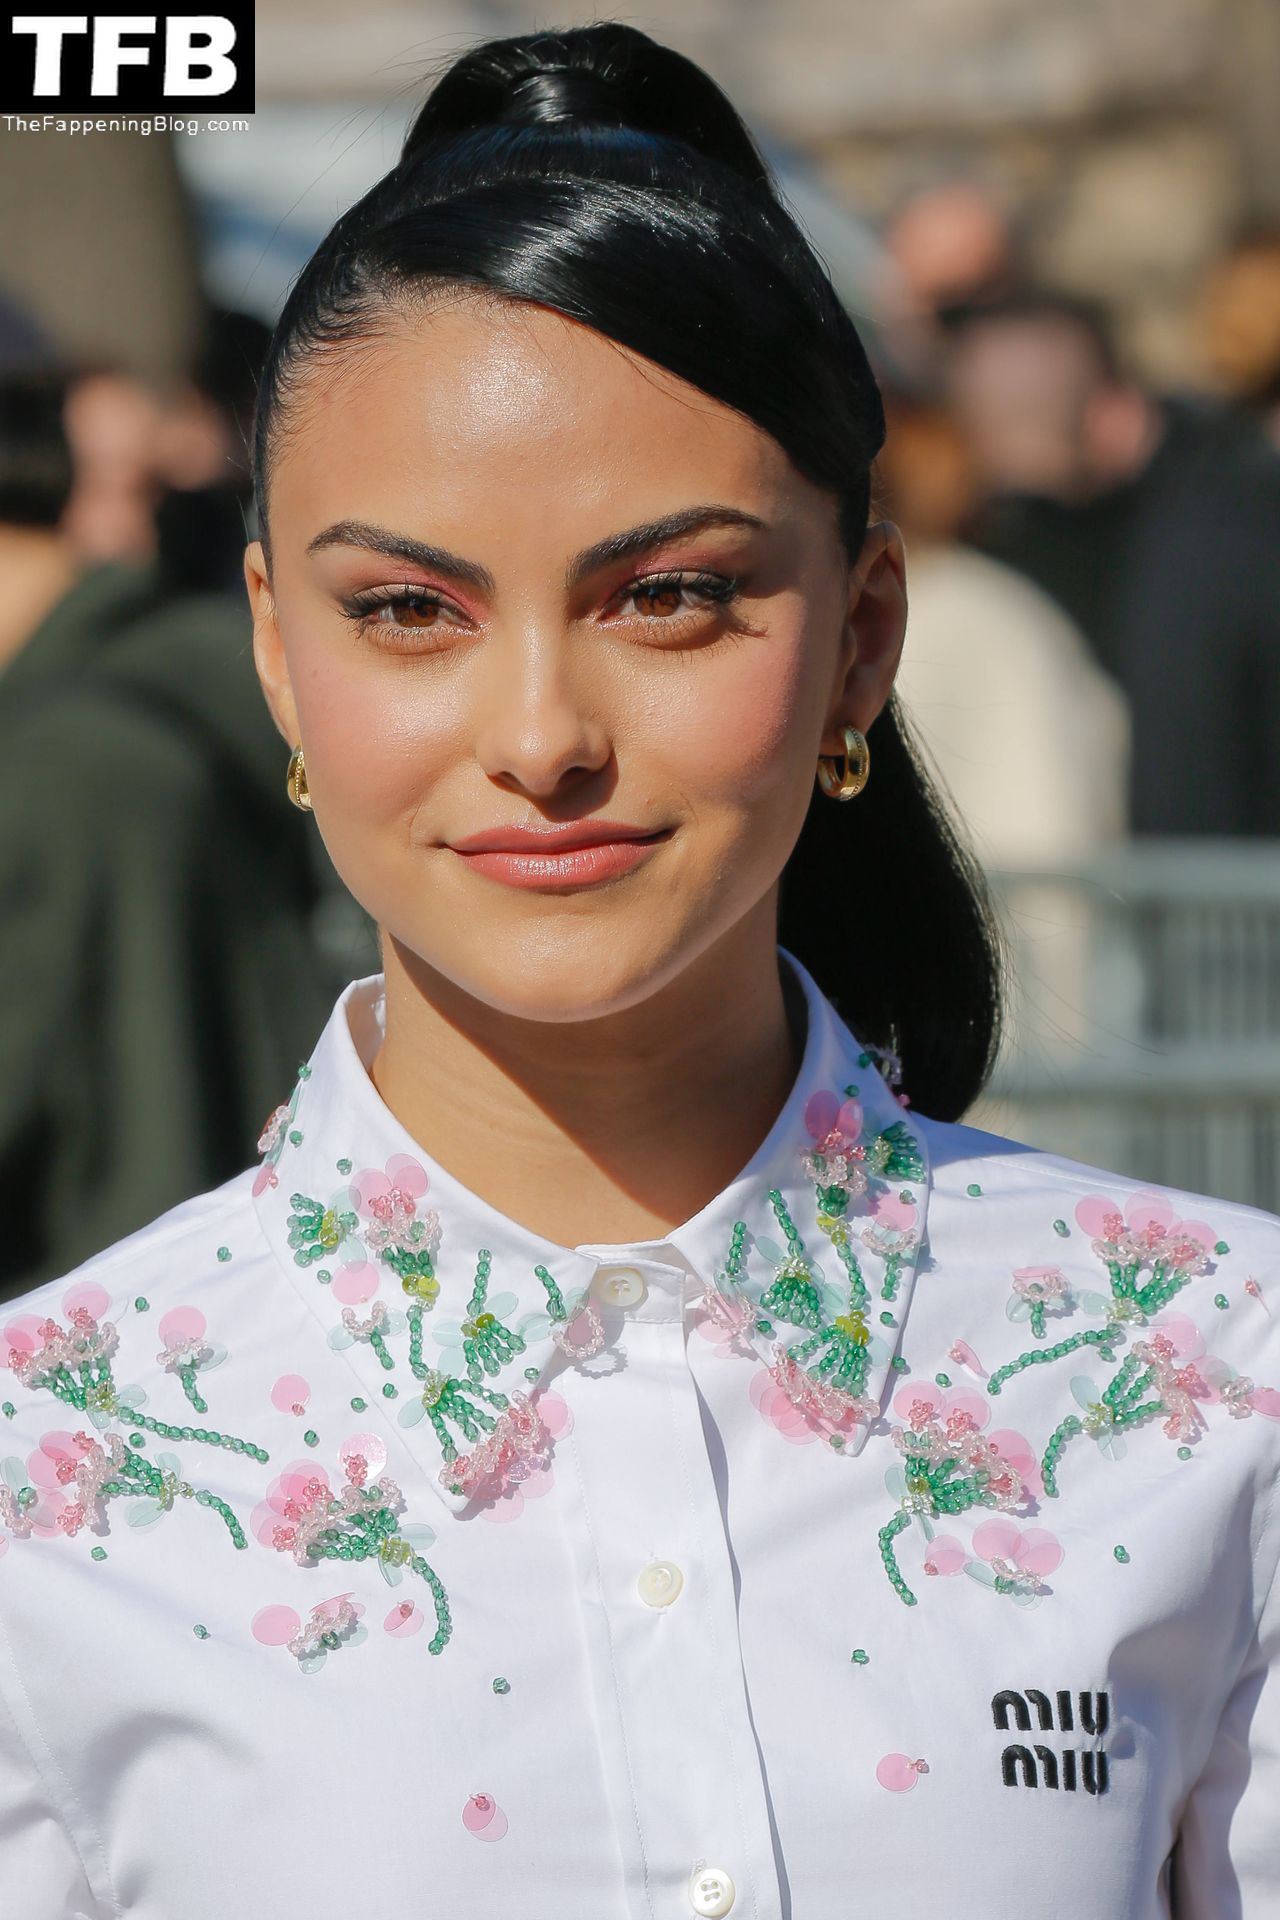 Camila-Mendes-Sexy-The-Fappening-Blog-22.jpg